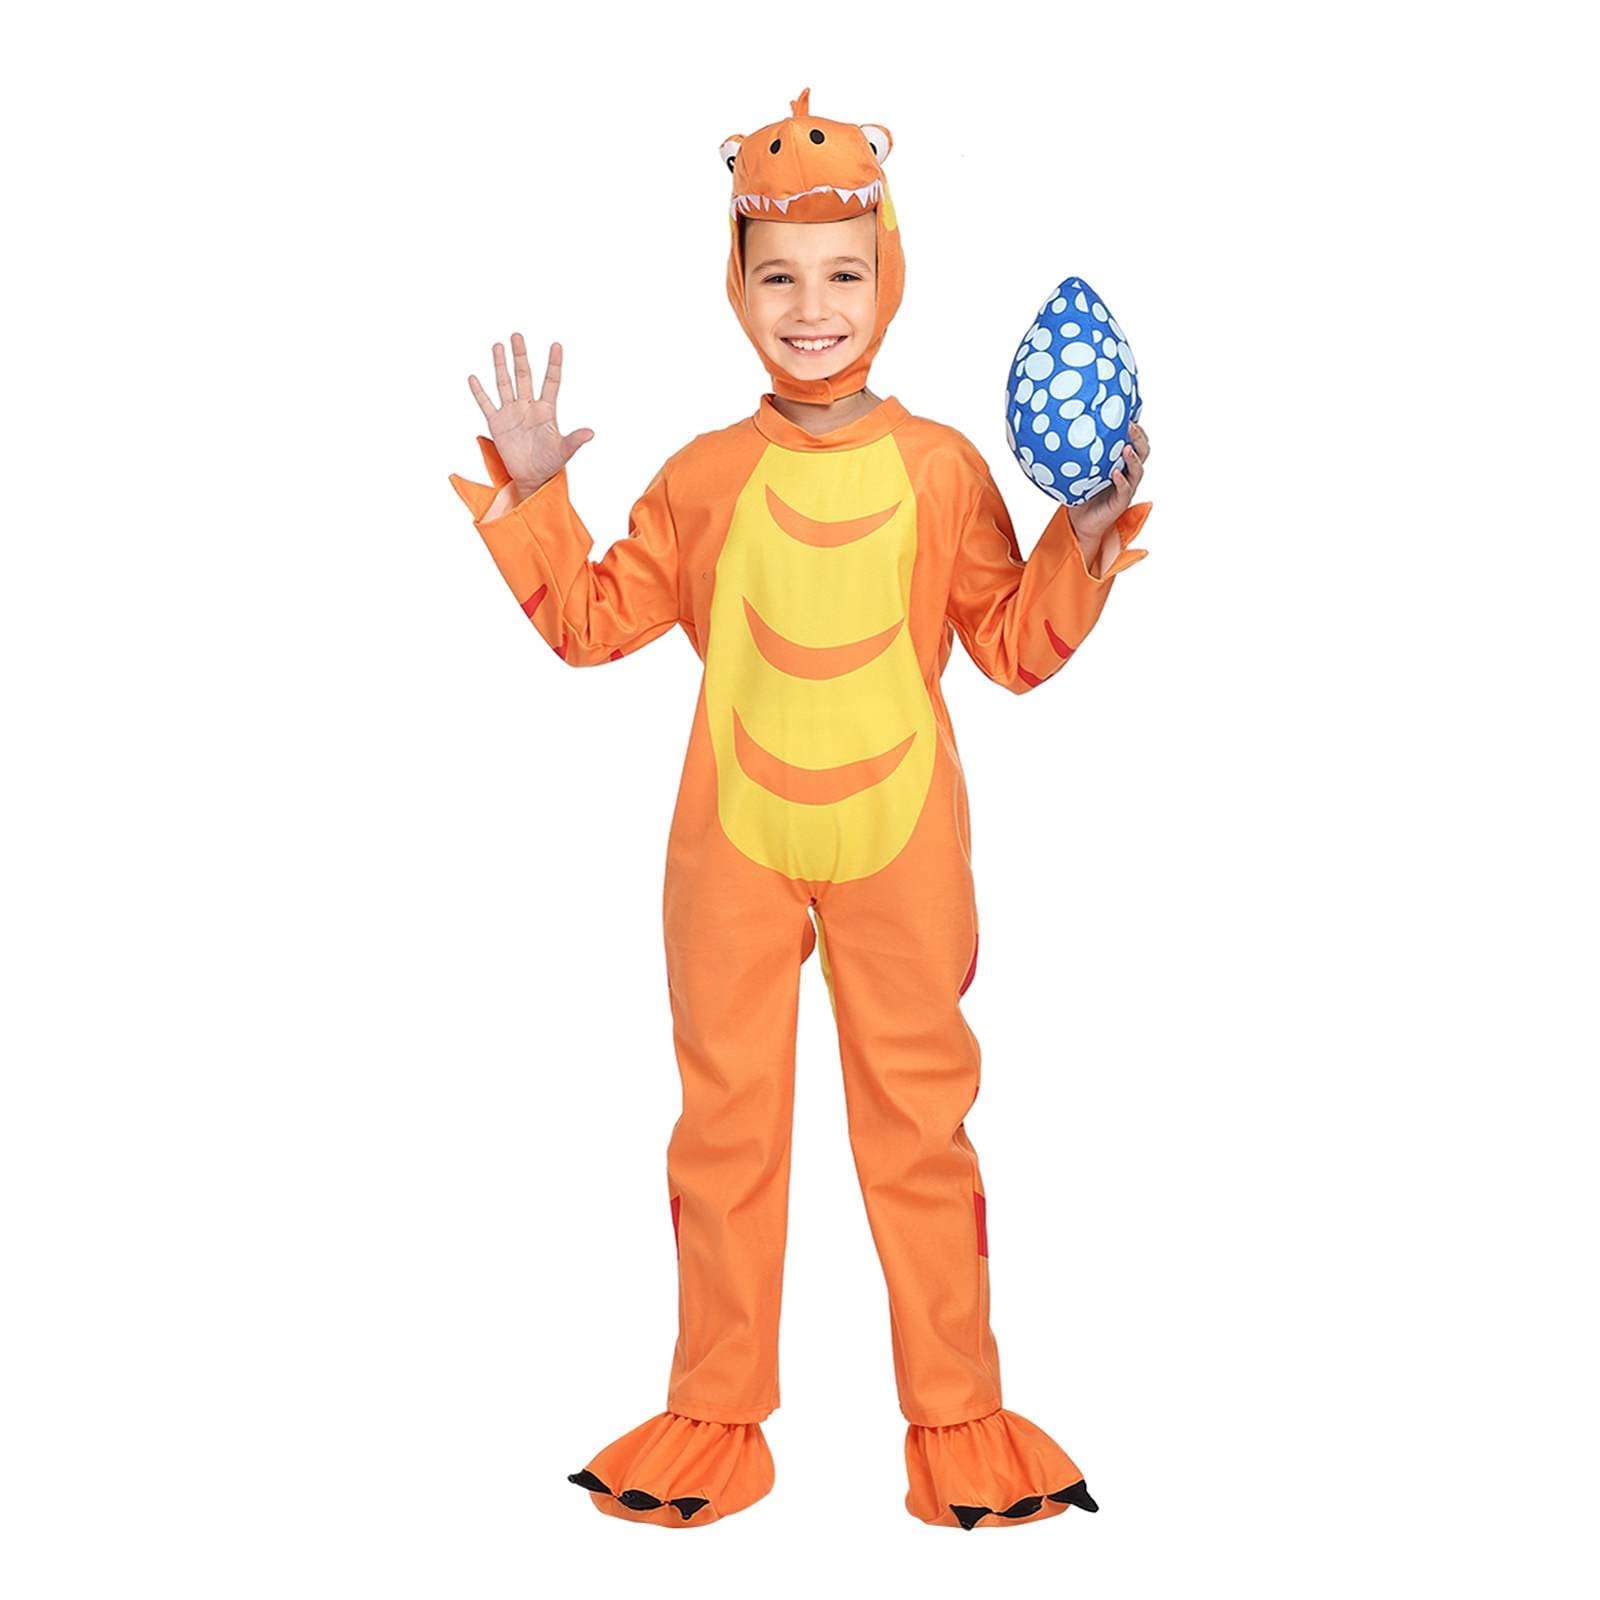 Twister.CK Kids Dinosaur Costume for Halloween Dinosaur Dress Up Party and Role Play,Available in 3 Kids Sizes T S M